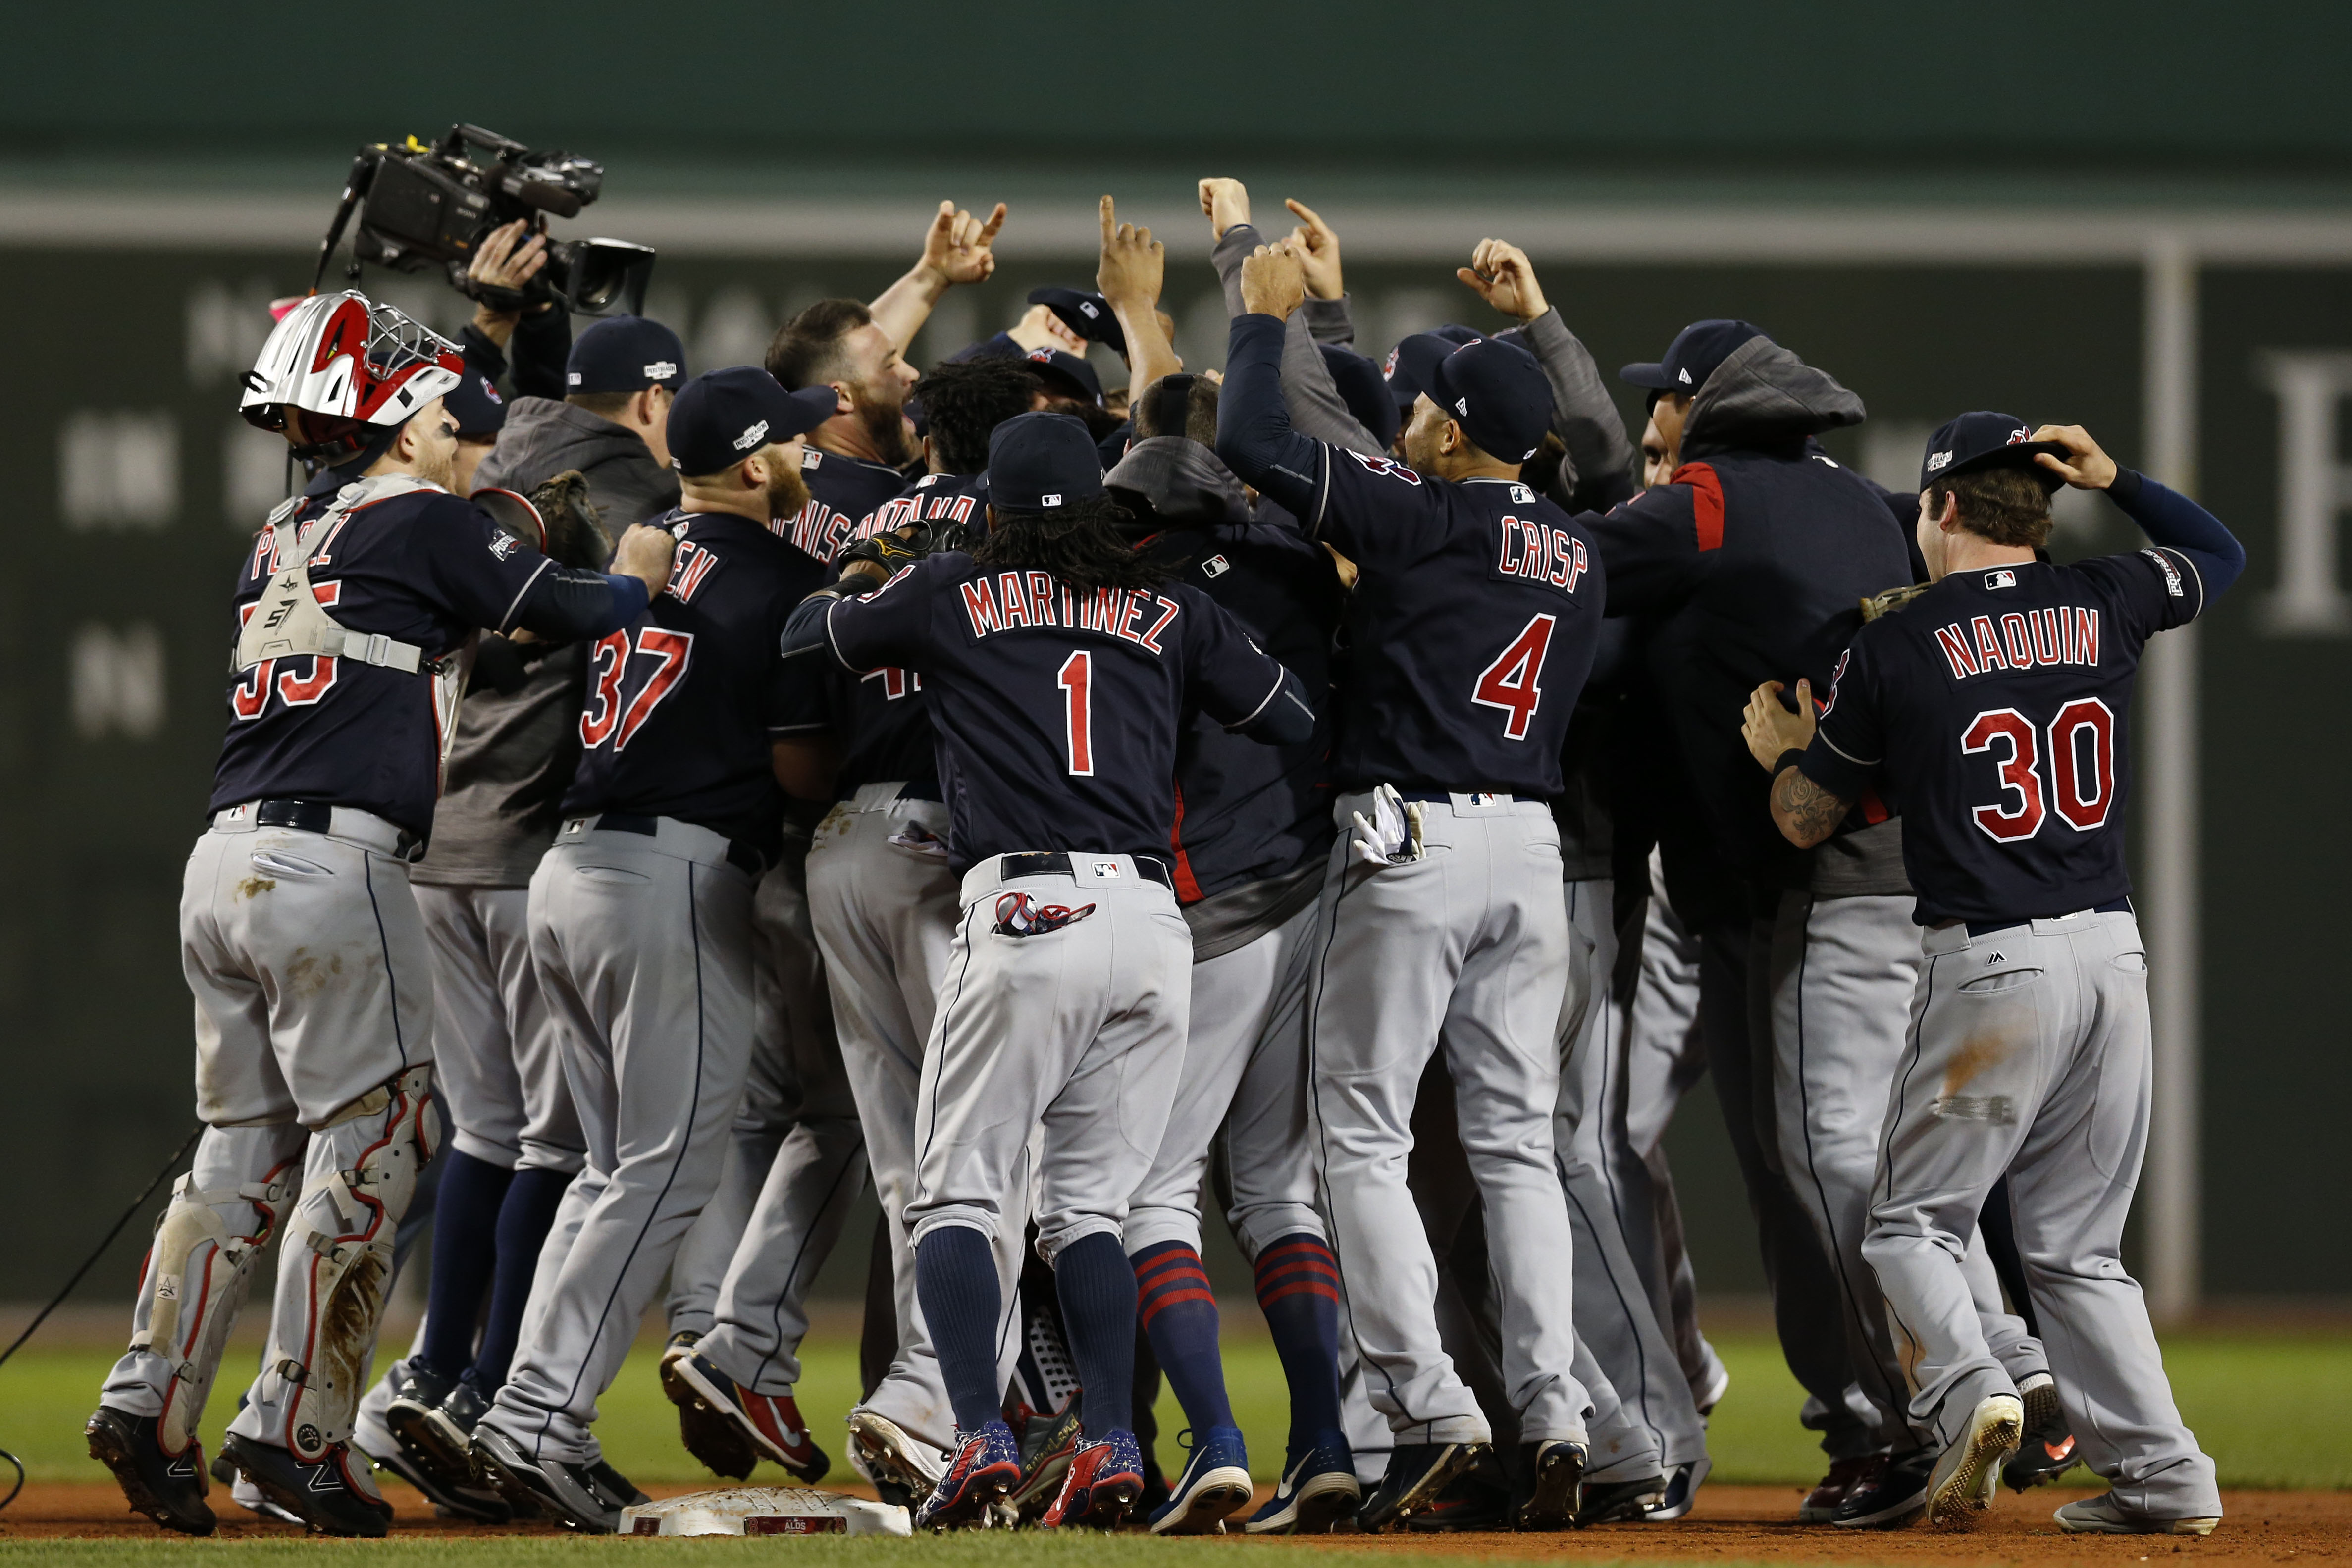 2016 ALCS: Indians Eliminate Blue Jays To Advance To World Series